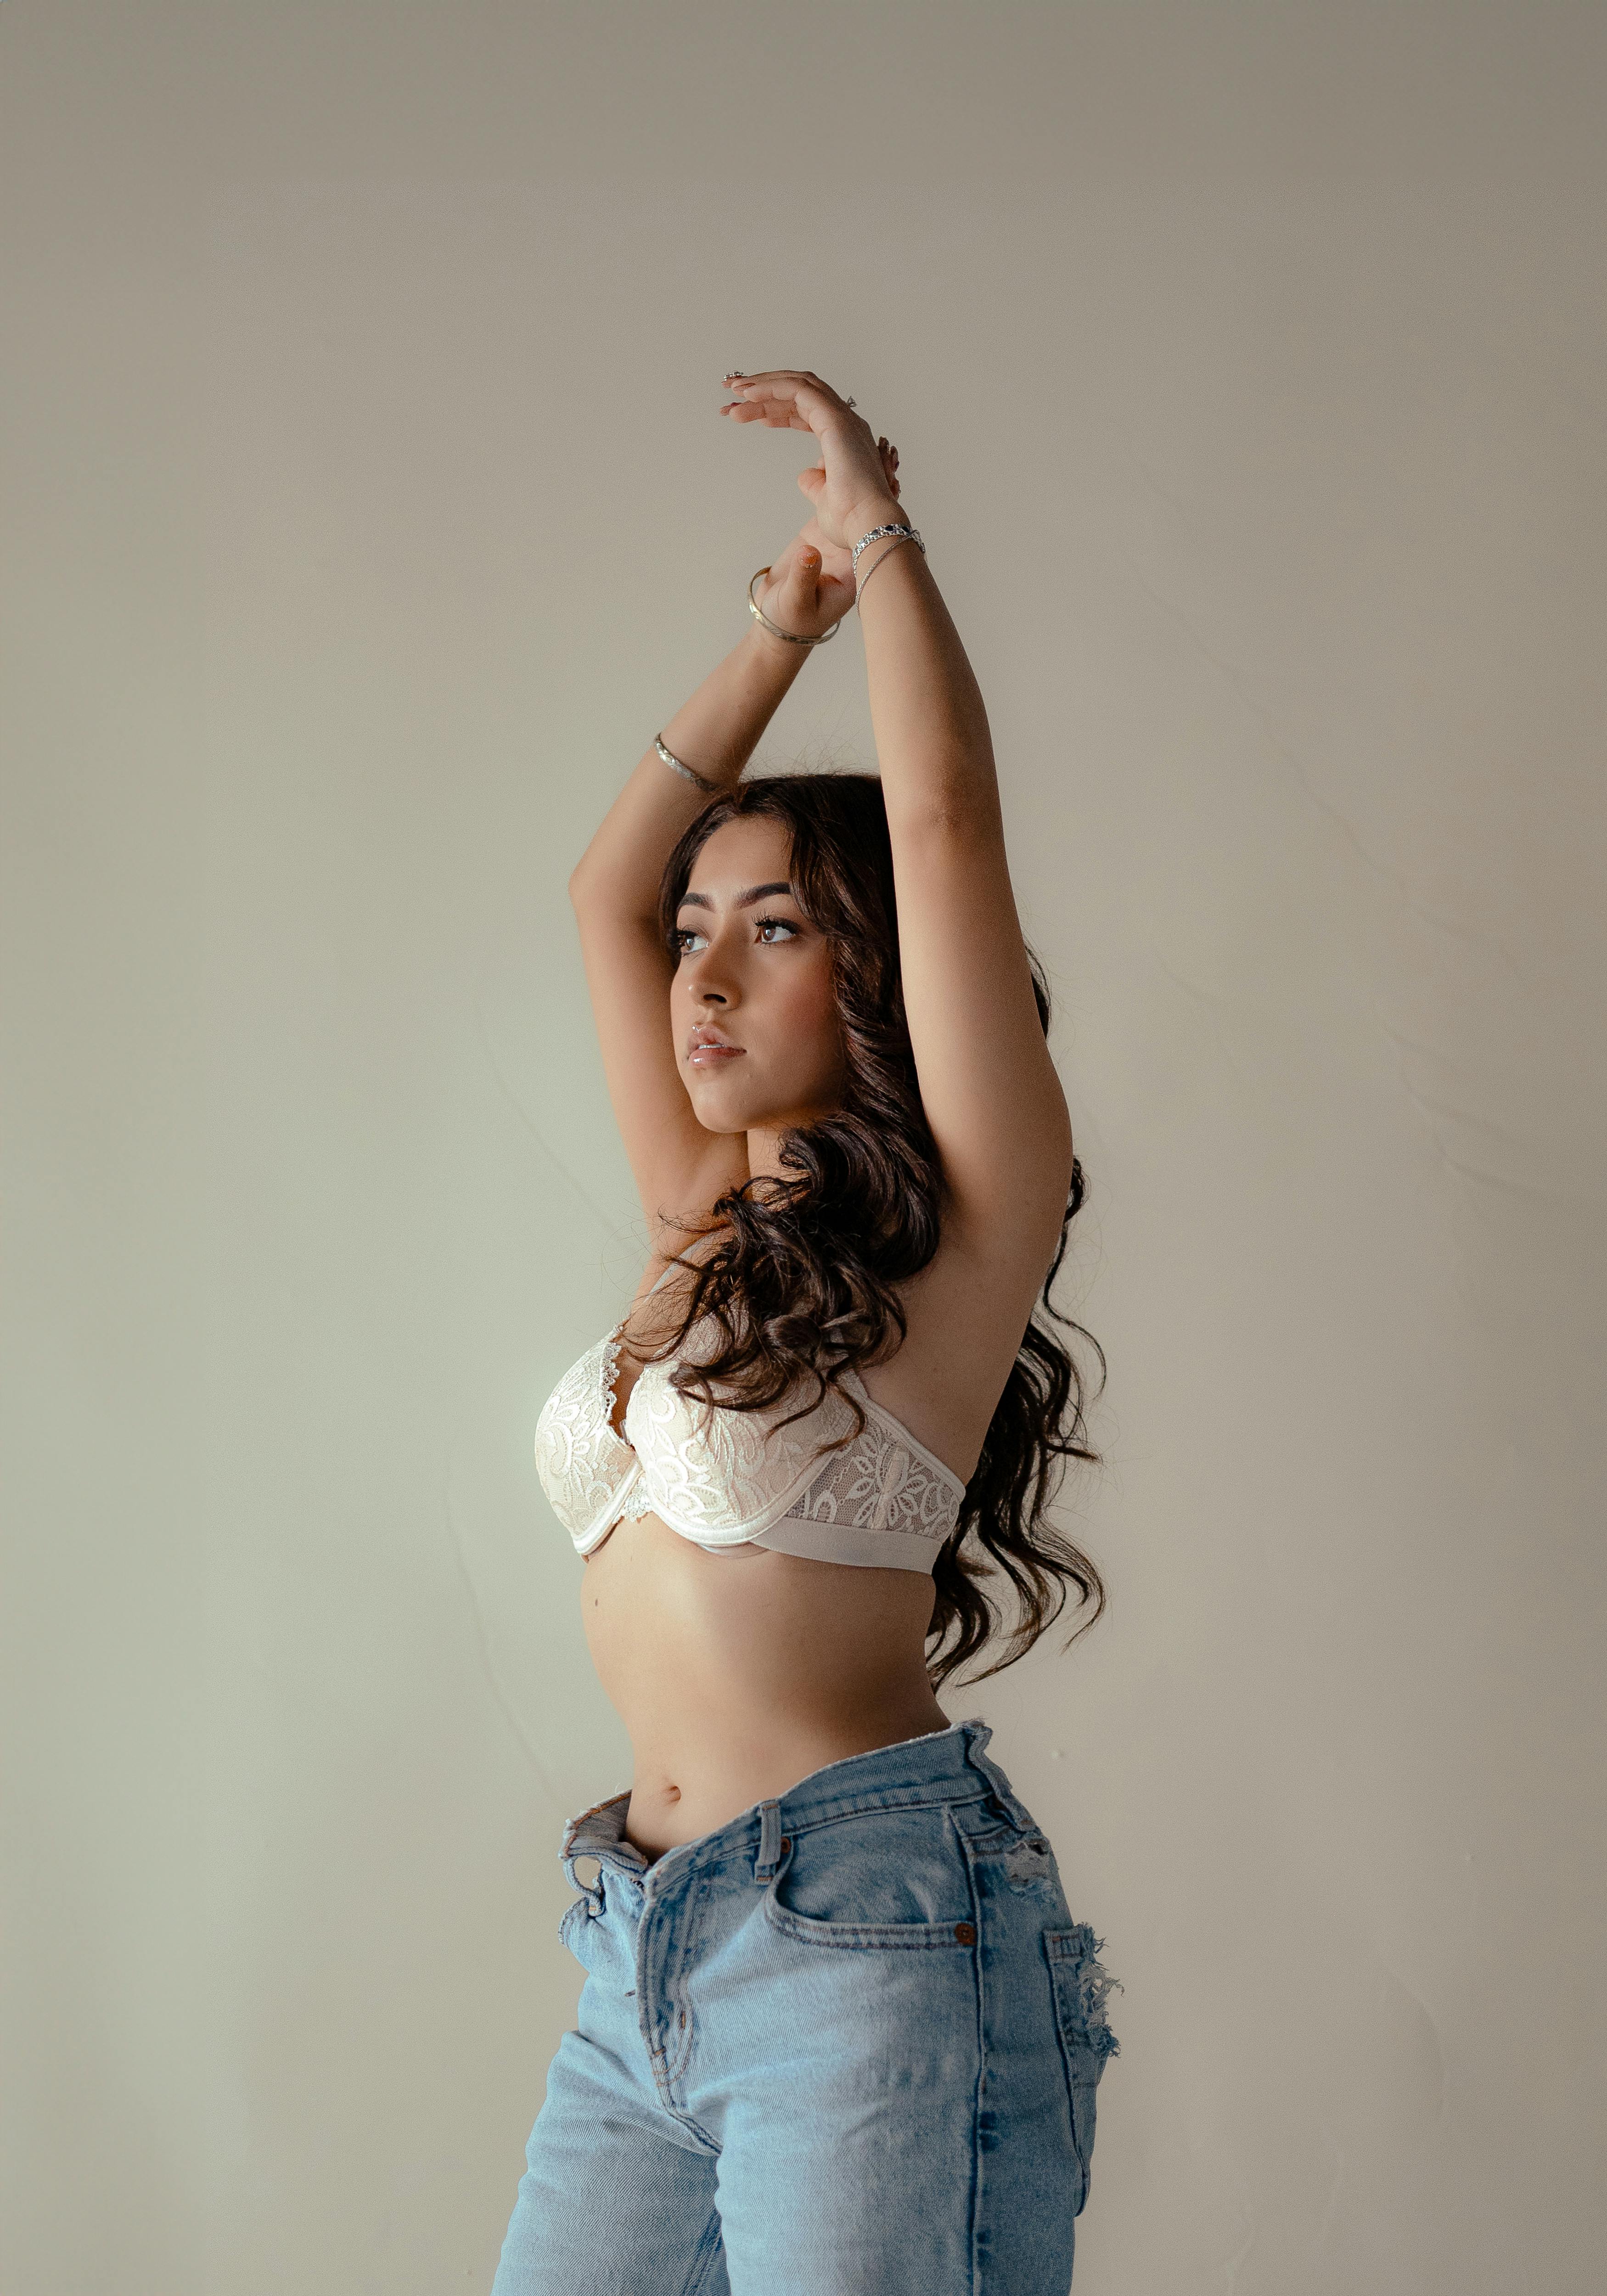 Young Woman in a Bra and Jeans Standing with her Arms Raised · Free Stock  Photo